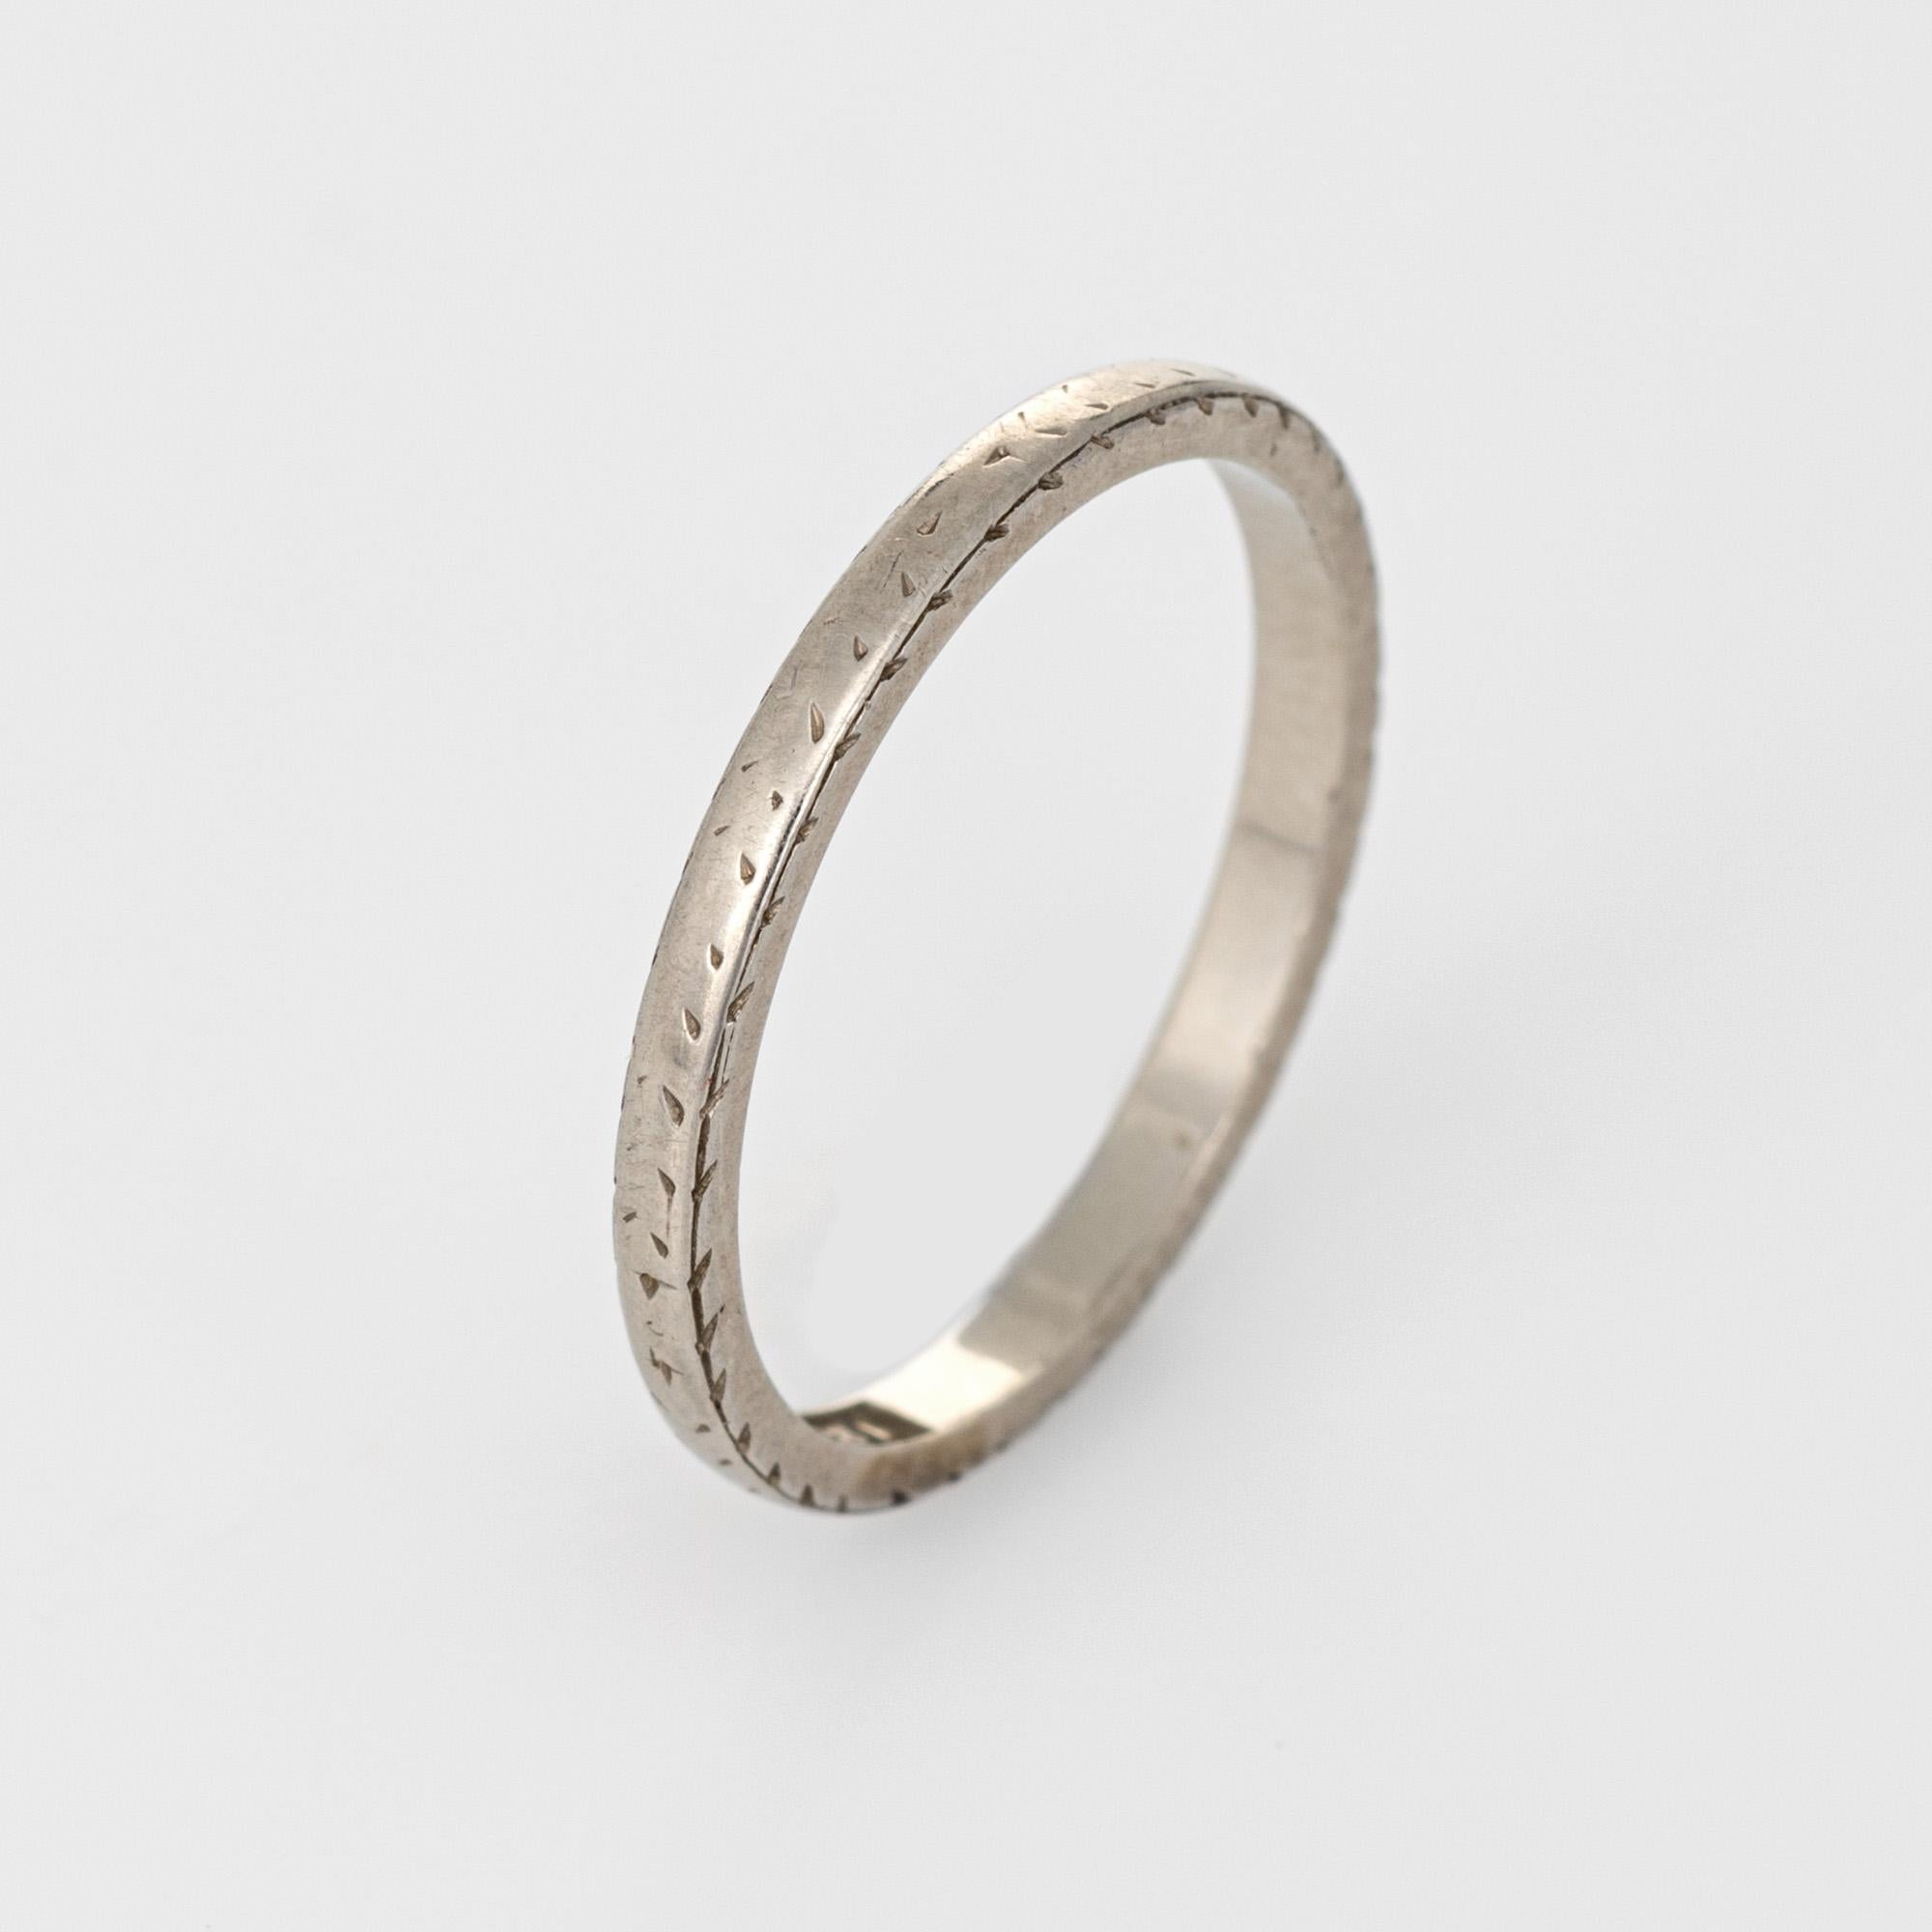 The ring epitomizes vintage charm and would make a lovely alternative wedding band. A hand etched foliate pattern is evident around the entire band (has worn down due to age and wear). Great worn alone or stacked with your jewelry from any era. The